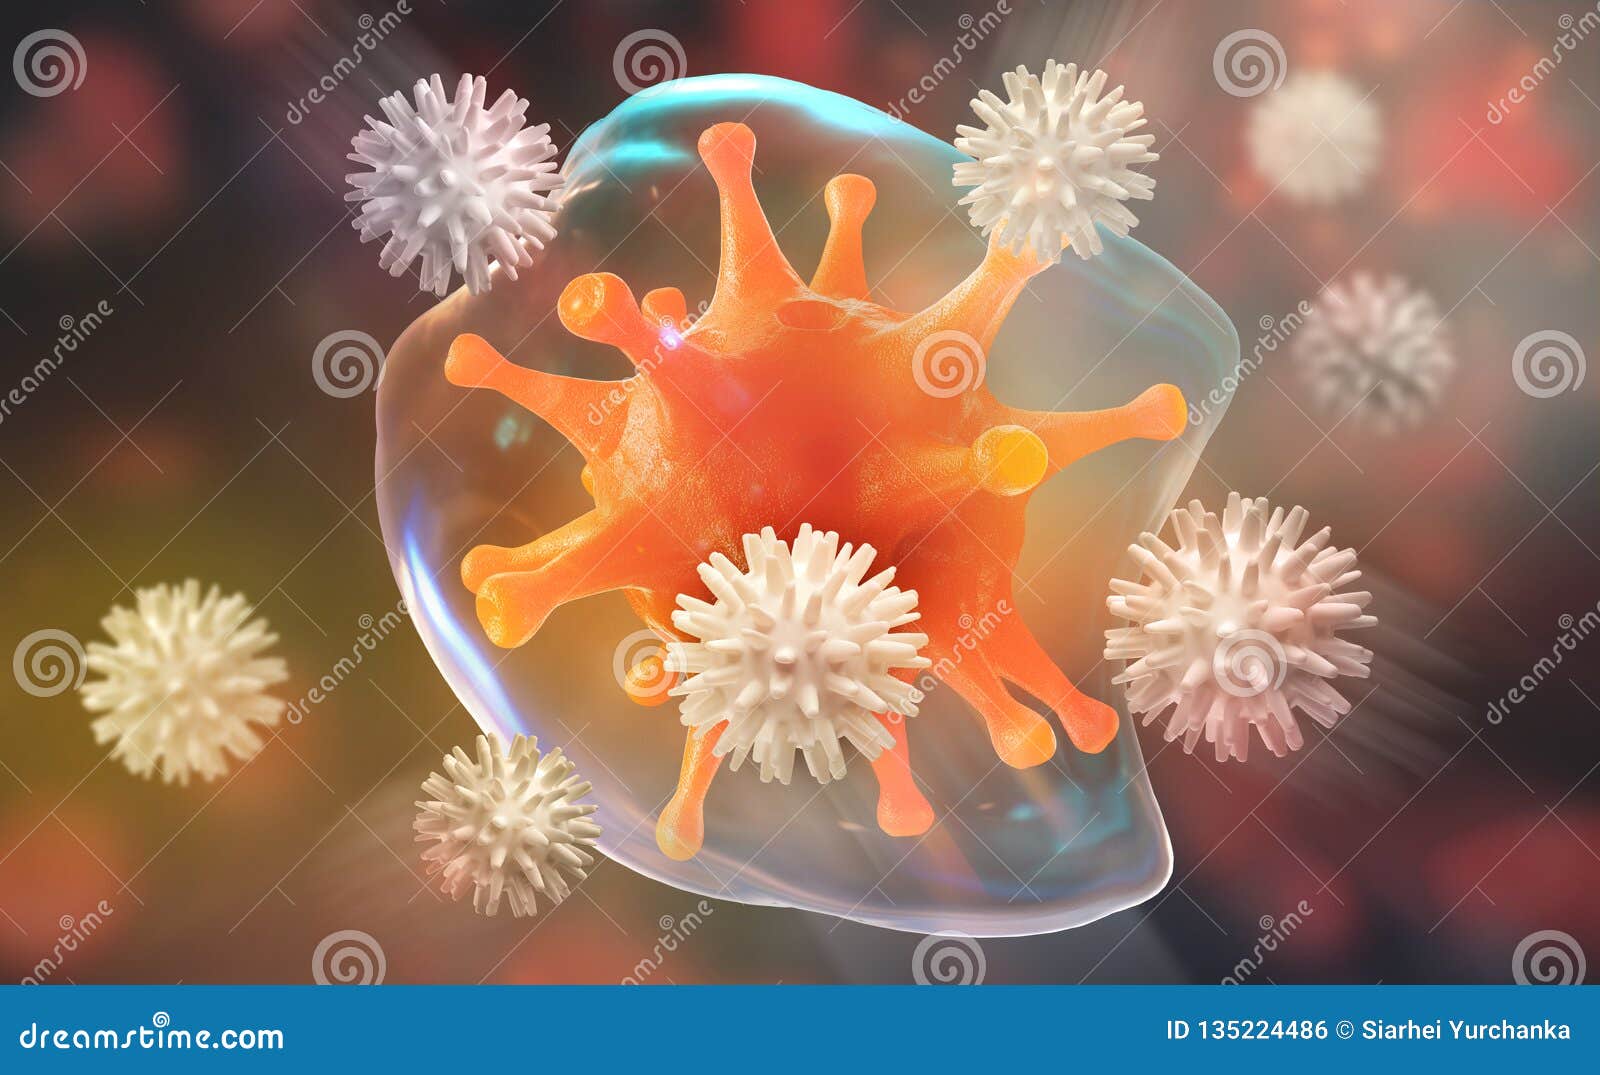 leukocytes attack the virus. immunity of the body. 3d  on medical research